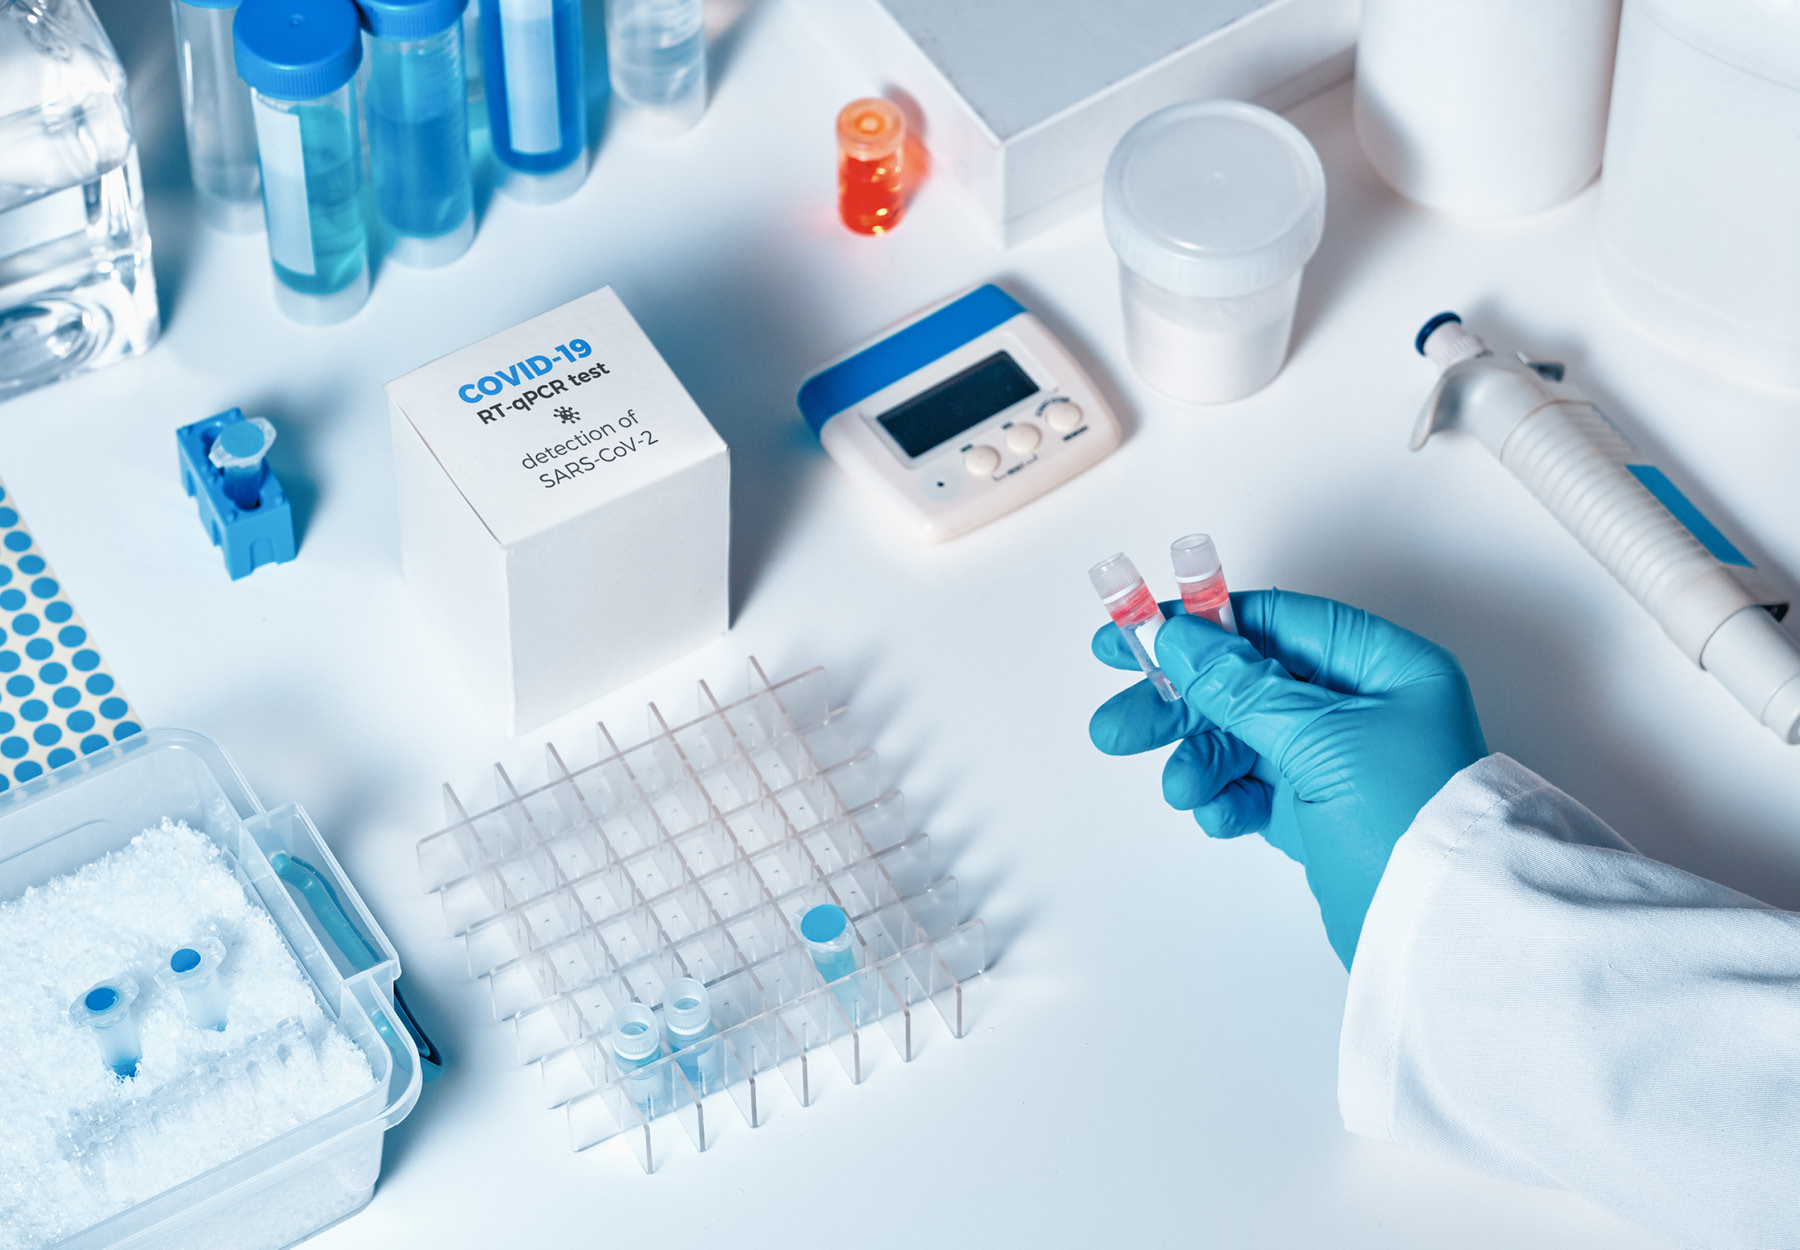 Closeup of lab professional setting up a COVID-19 PCR test on a lab bench. iStock image.